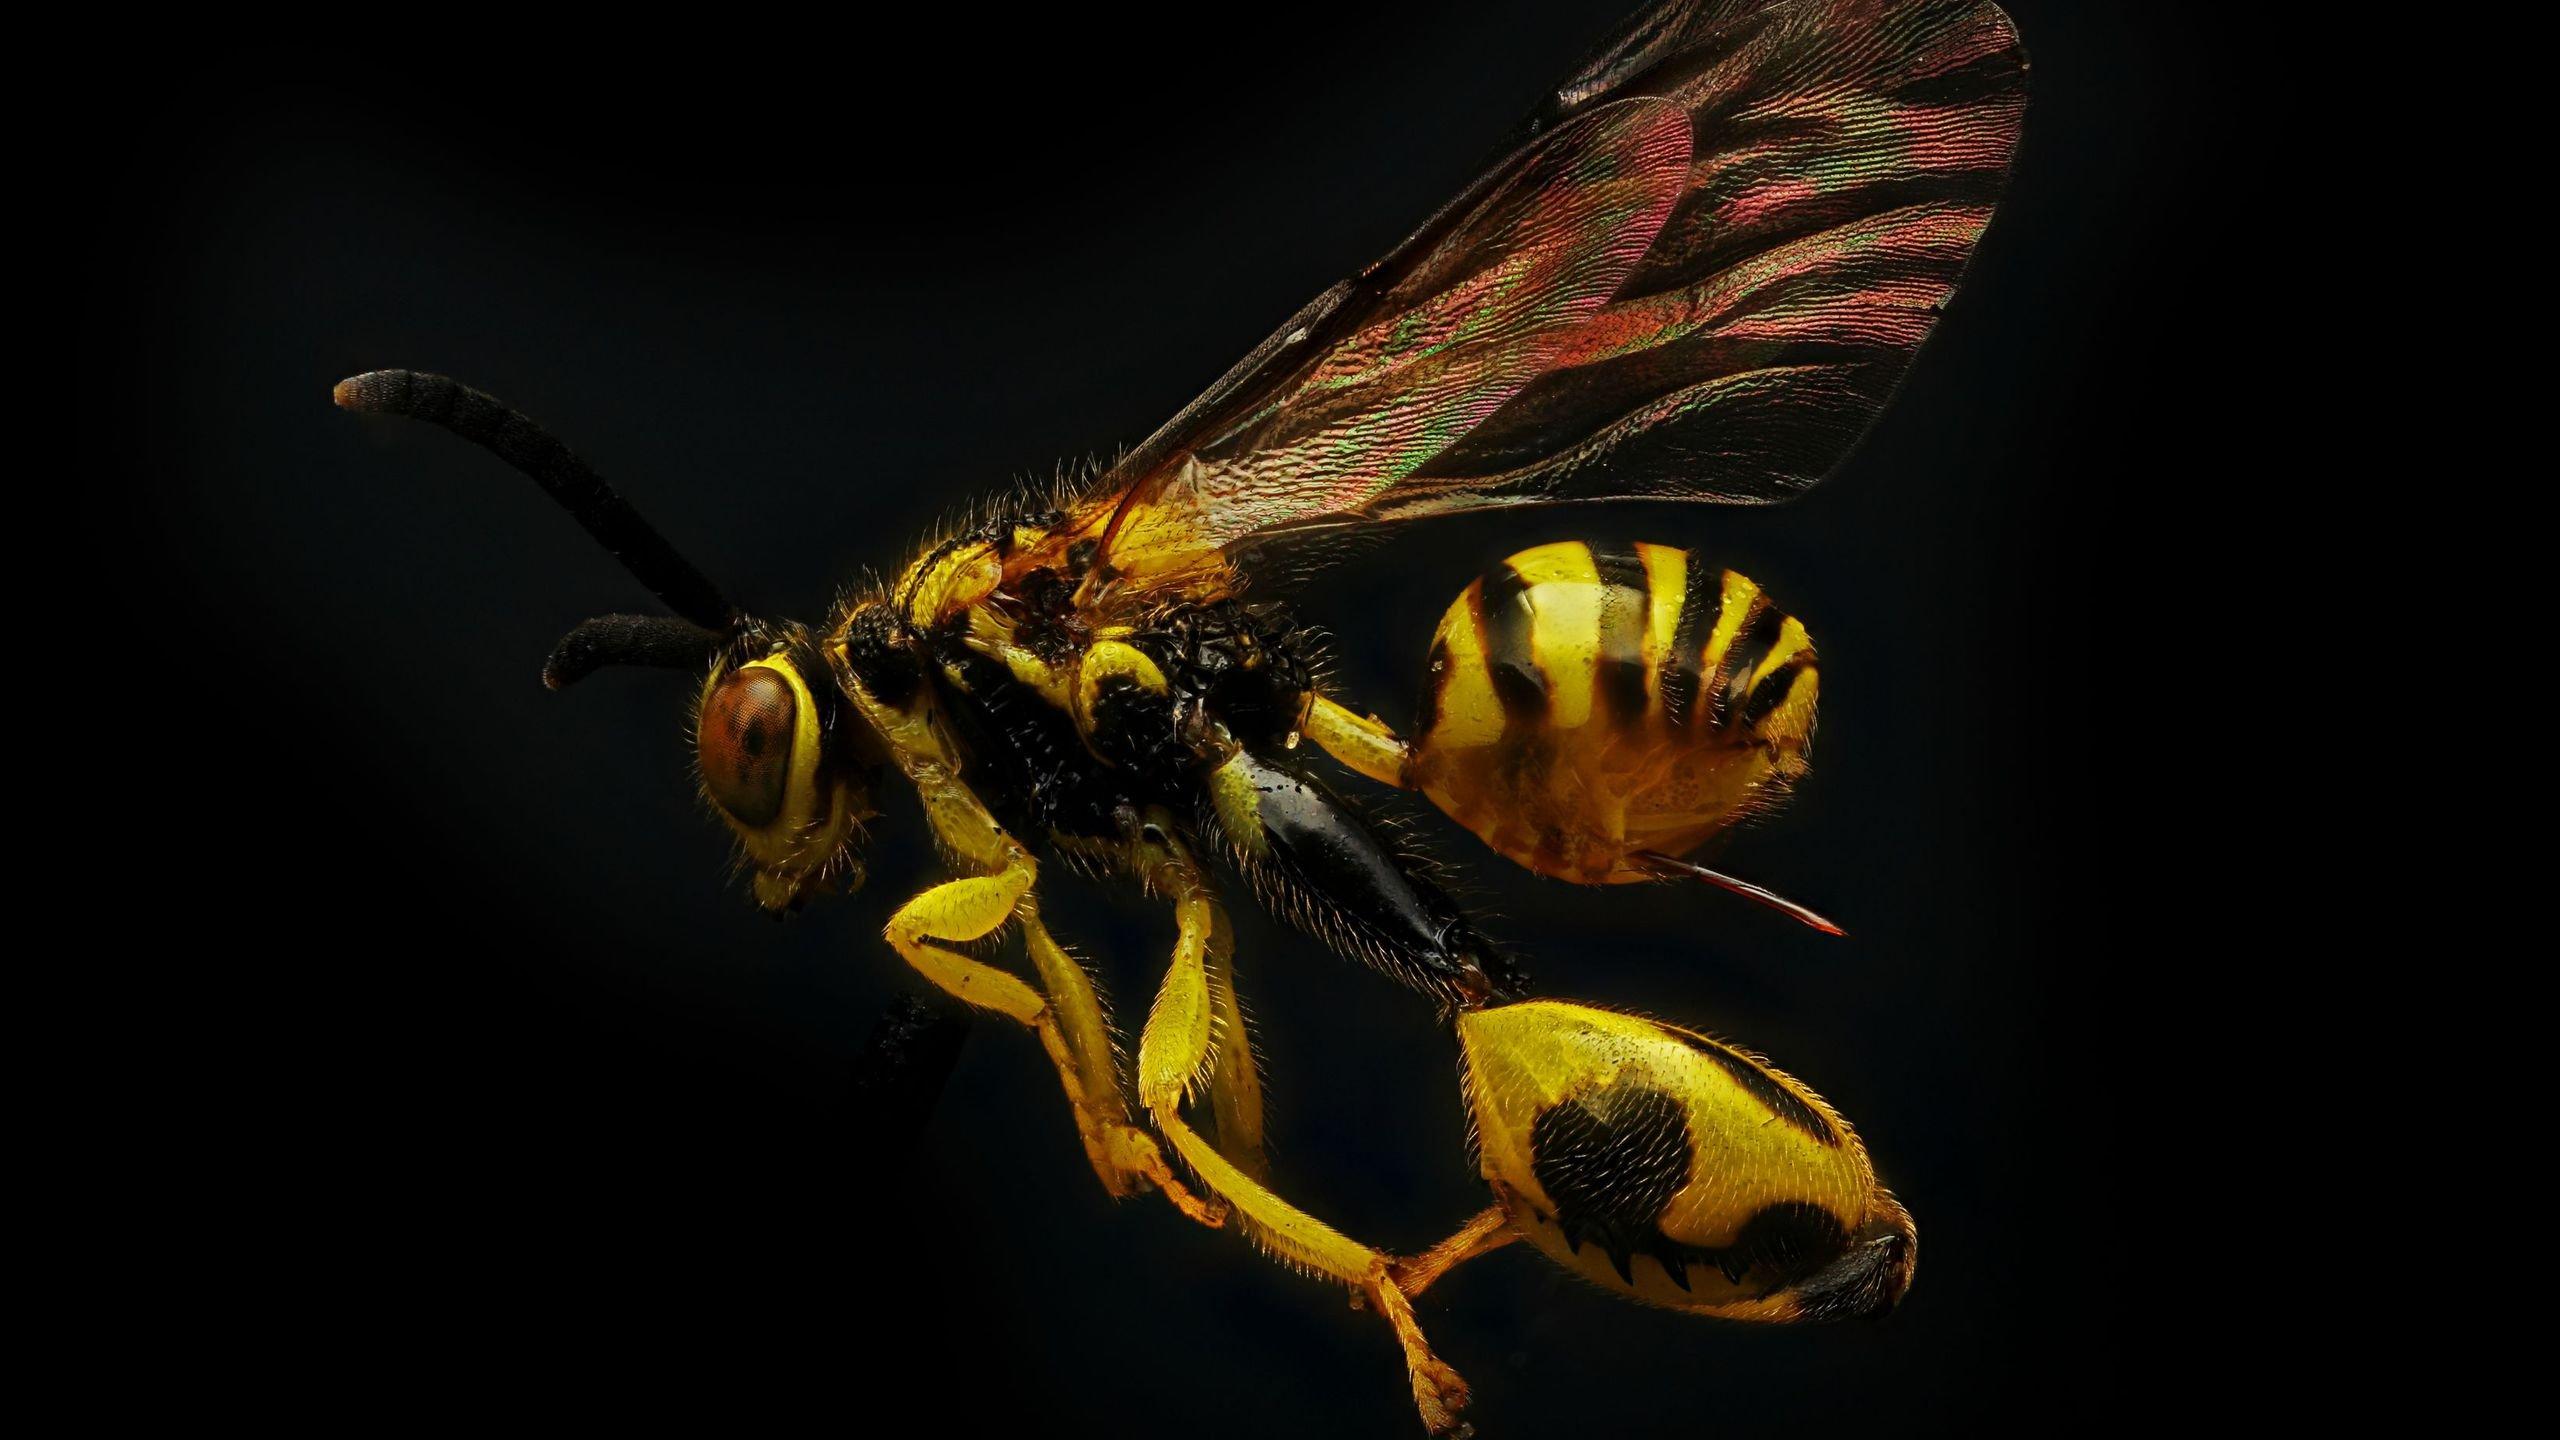 wasp 4K wallpaper for your desktop or mobile screen free